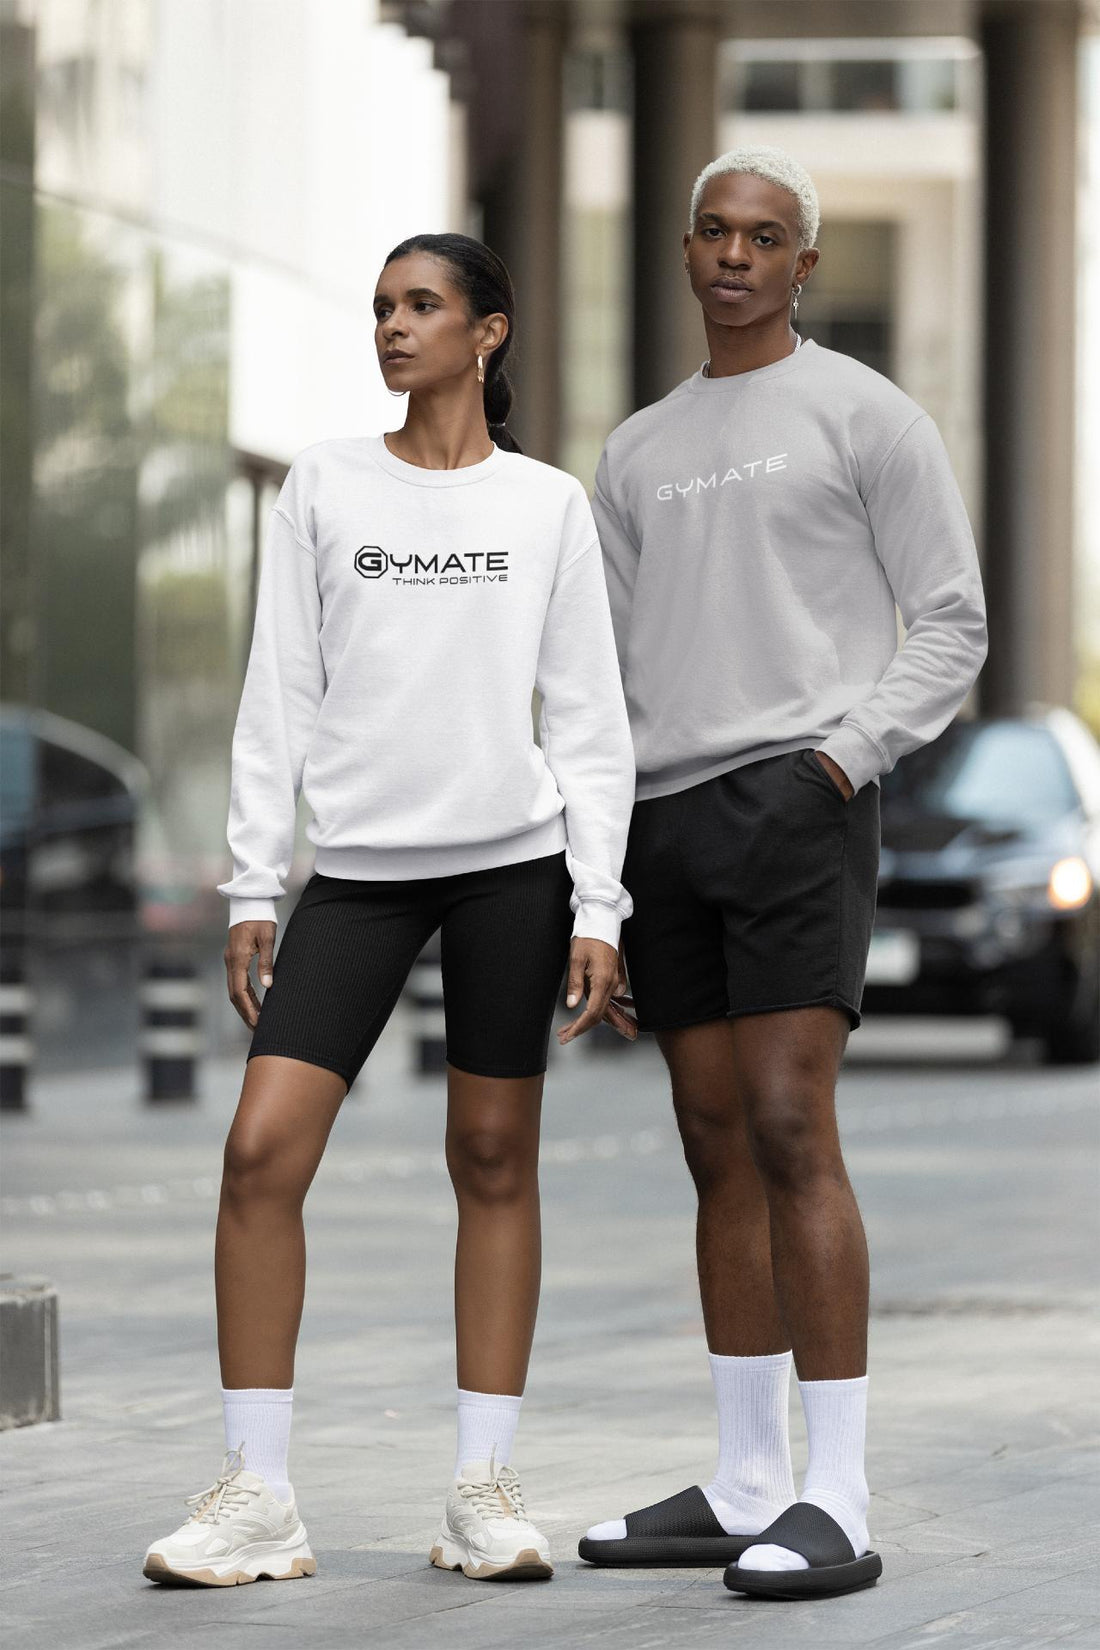 Gymate Pro UK designer athleisure and activewear as seen on MSN